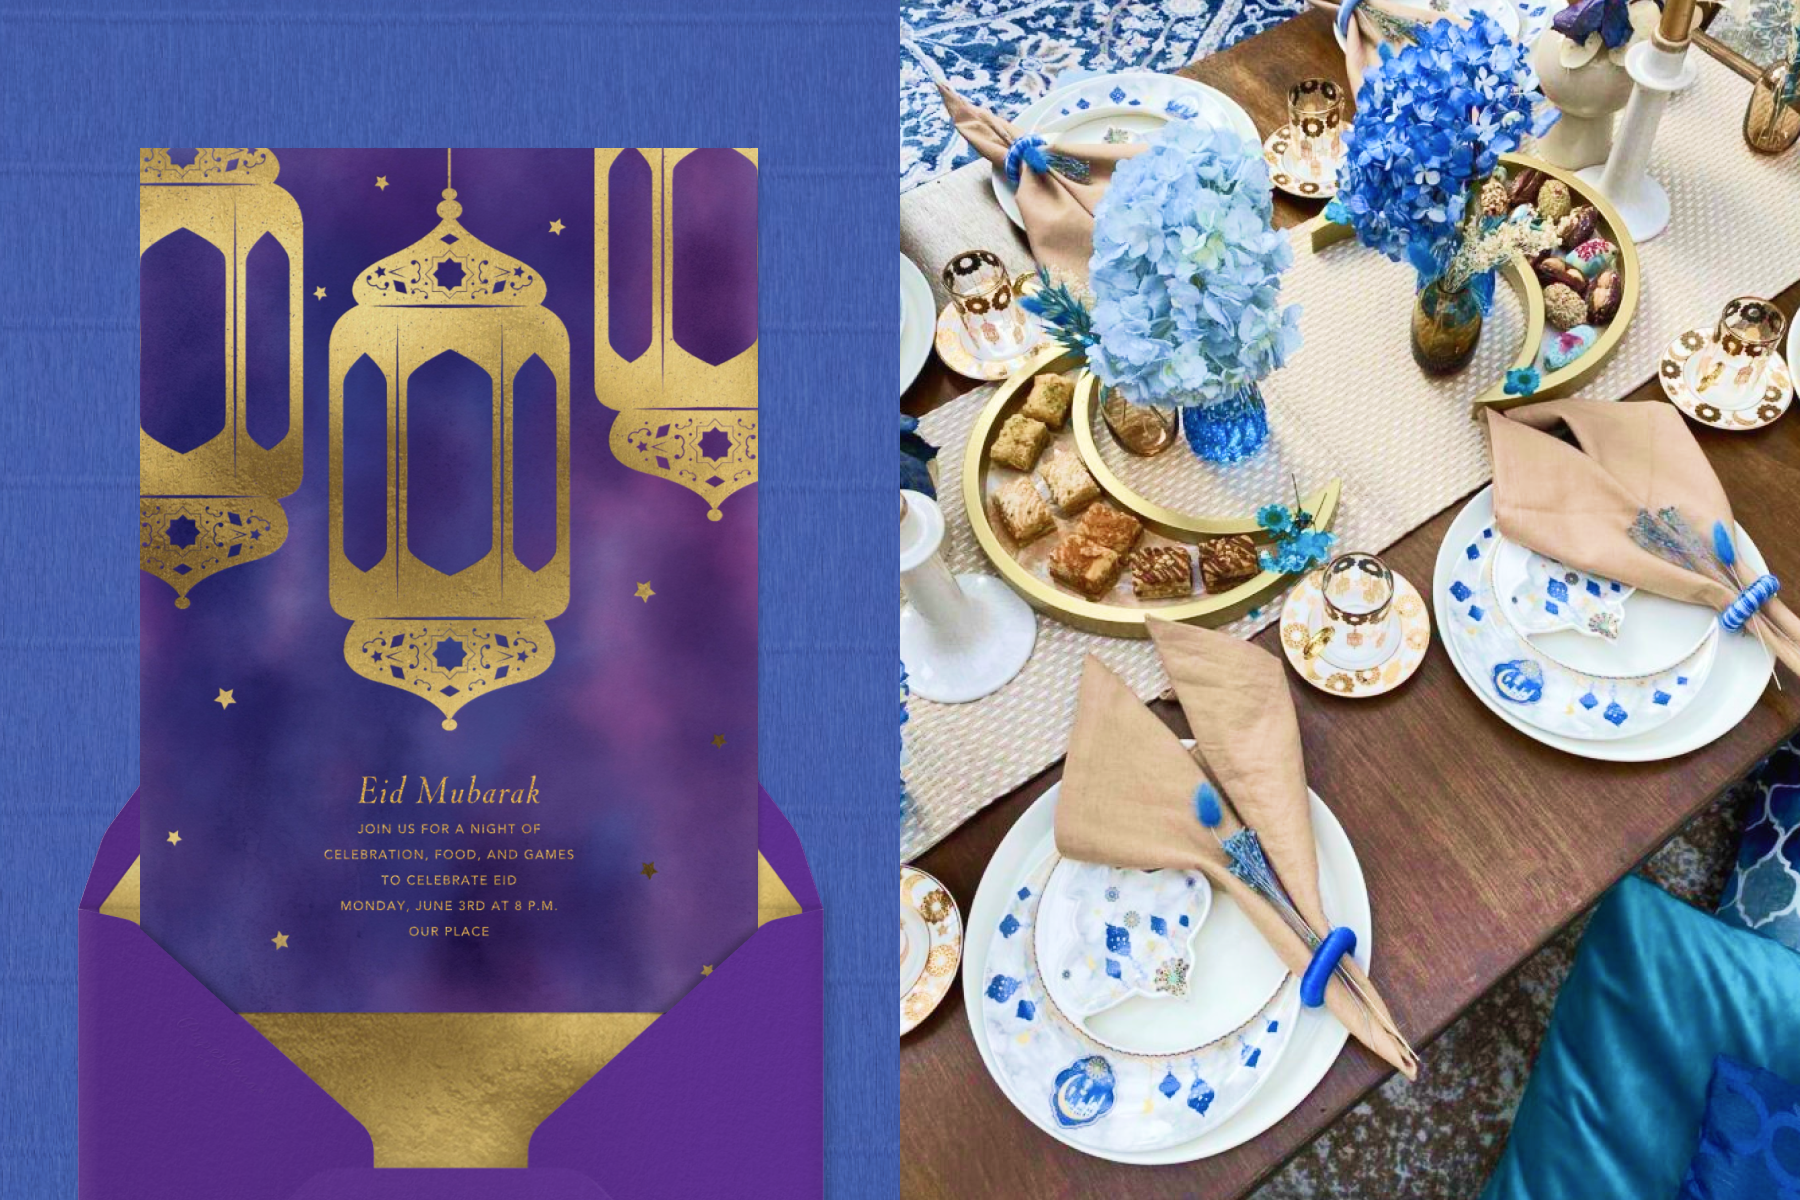 Left: A purple and gold Eid party invitation featuring lantern illustrations with a matching envelope; right: an overhead photo of a set table with Eid decor and food.